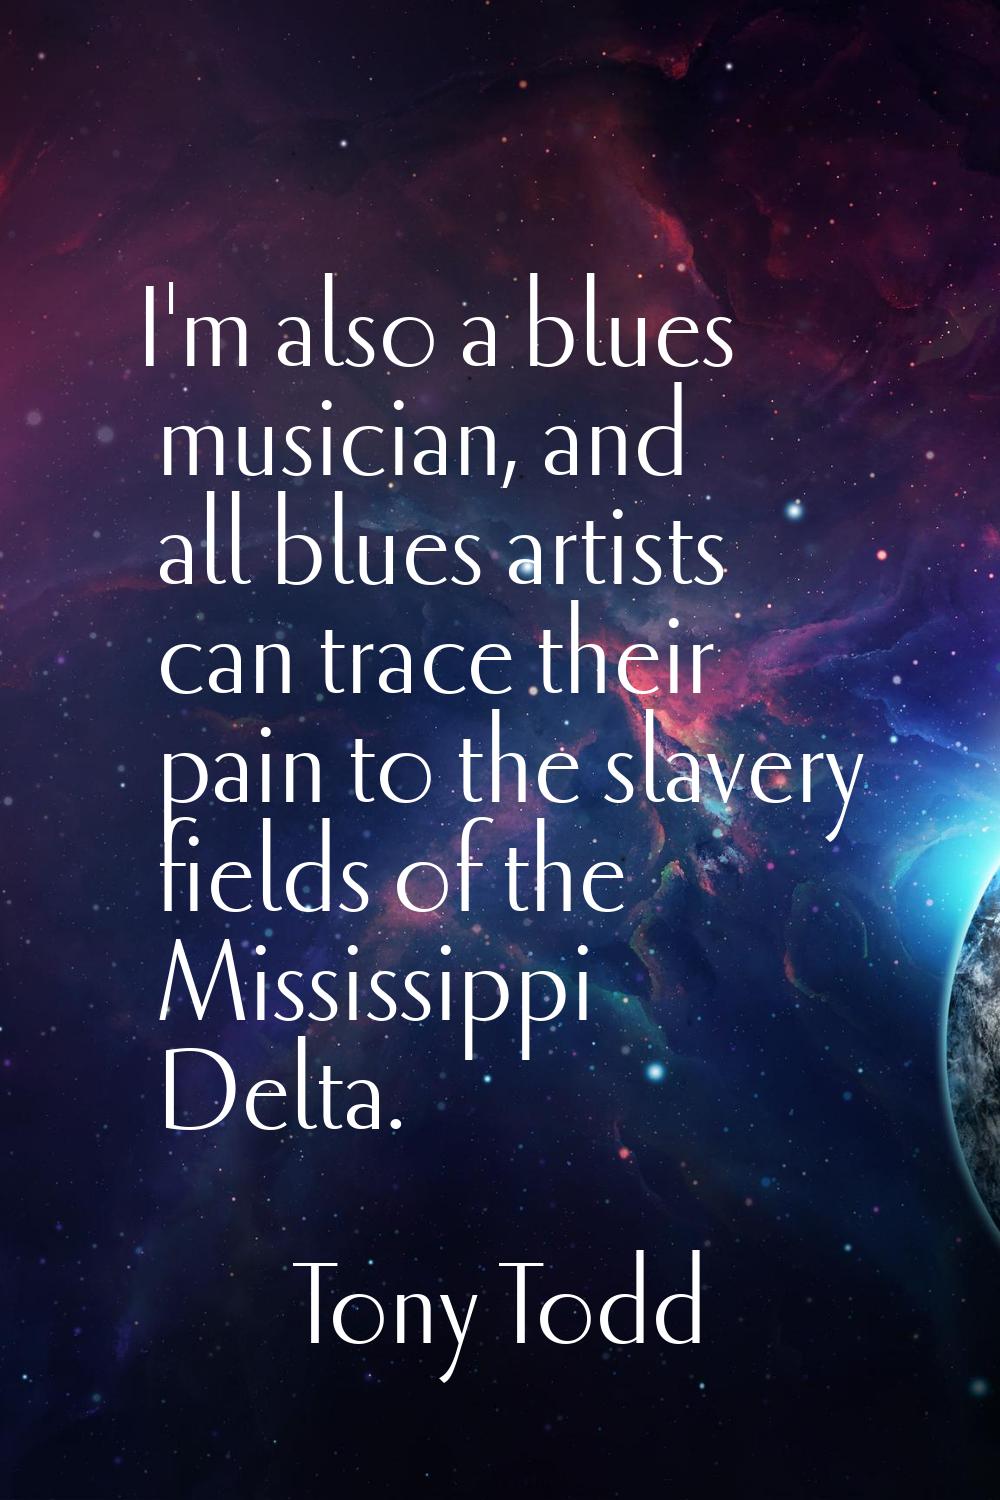 I'm also a blues musician, and all blues artists can trace their pain to the slavery fields of the 